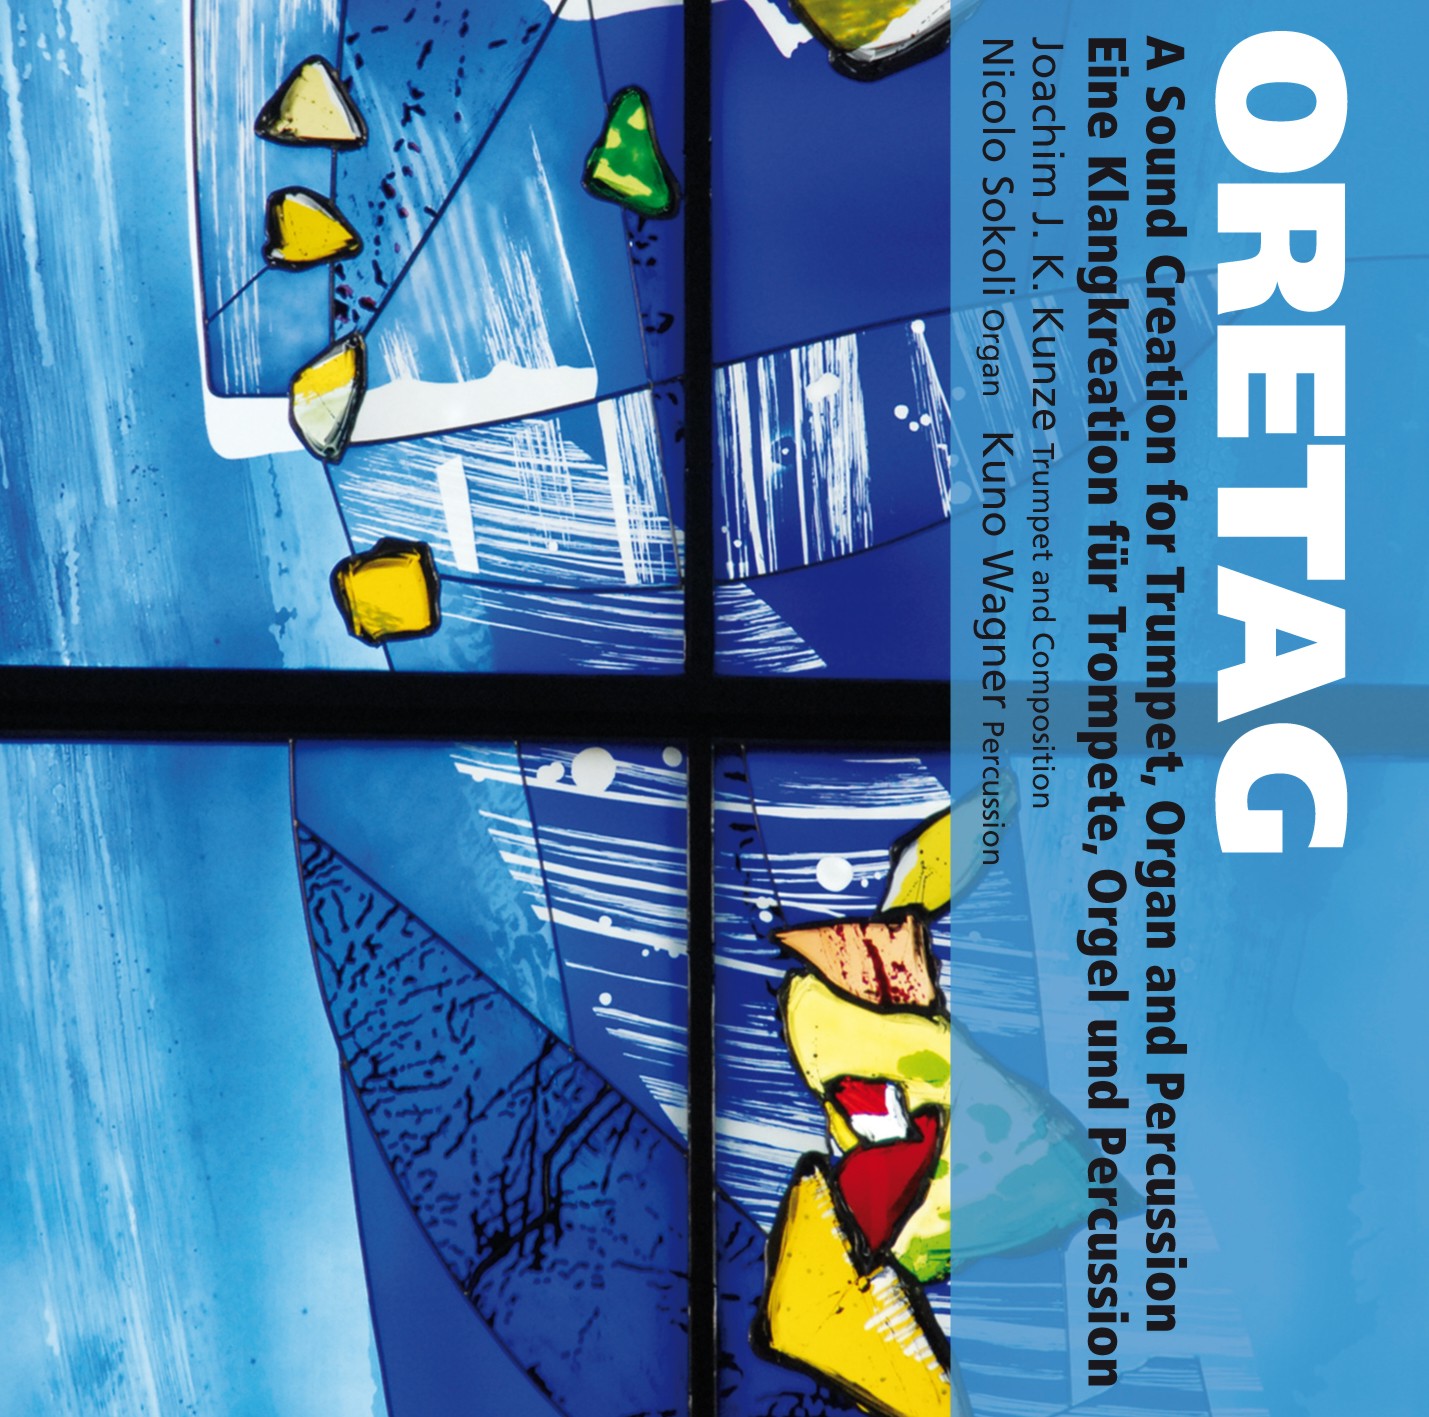 ORETAG - A Sound Creation in 12 Movements for Trumpet, Organ and Percussion